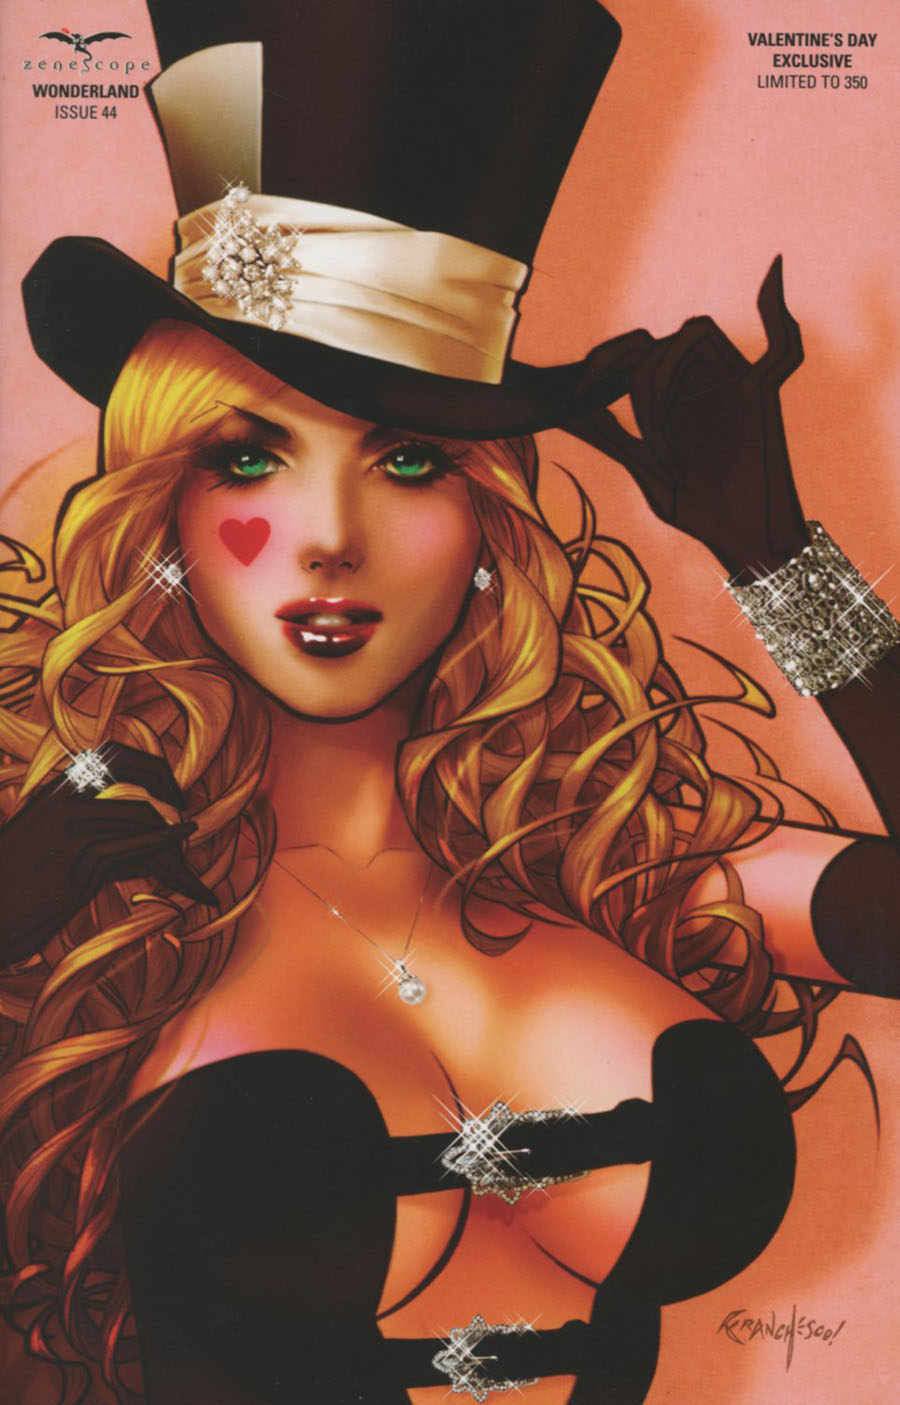 Grimm Fairy Tales Presents Wonderland Vol 2 #44 Cover F Valentines Day Exclusive Franchesco Variant Cover